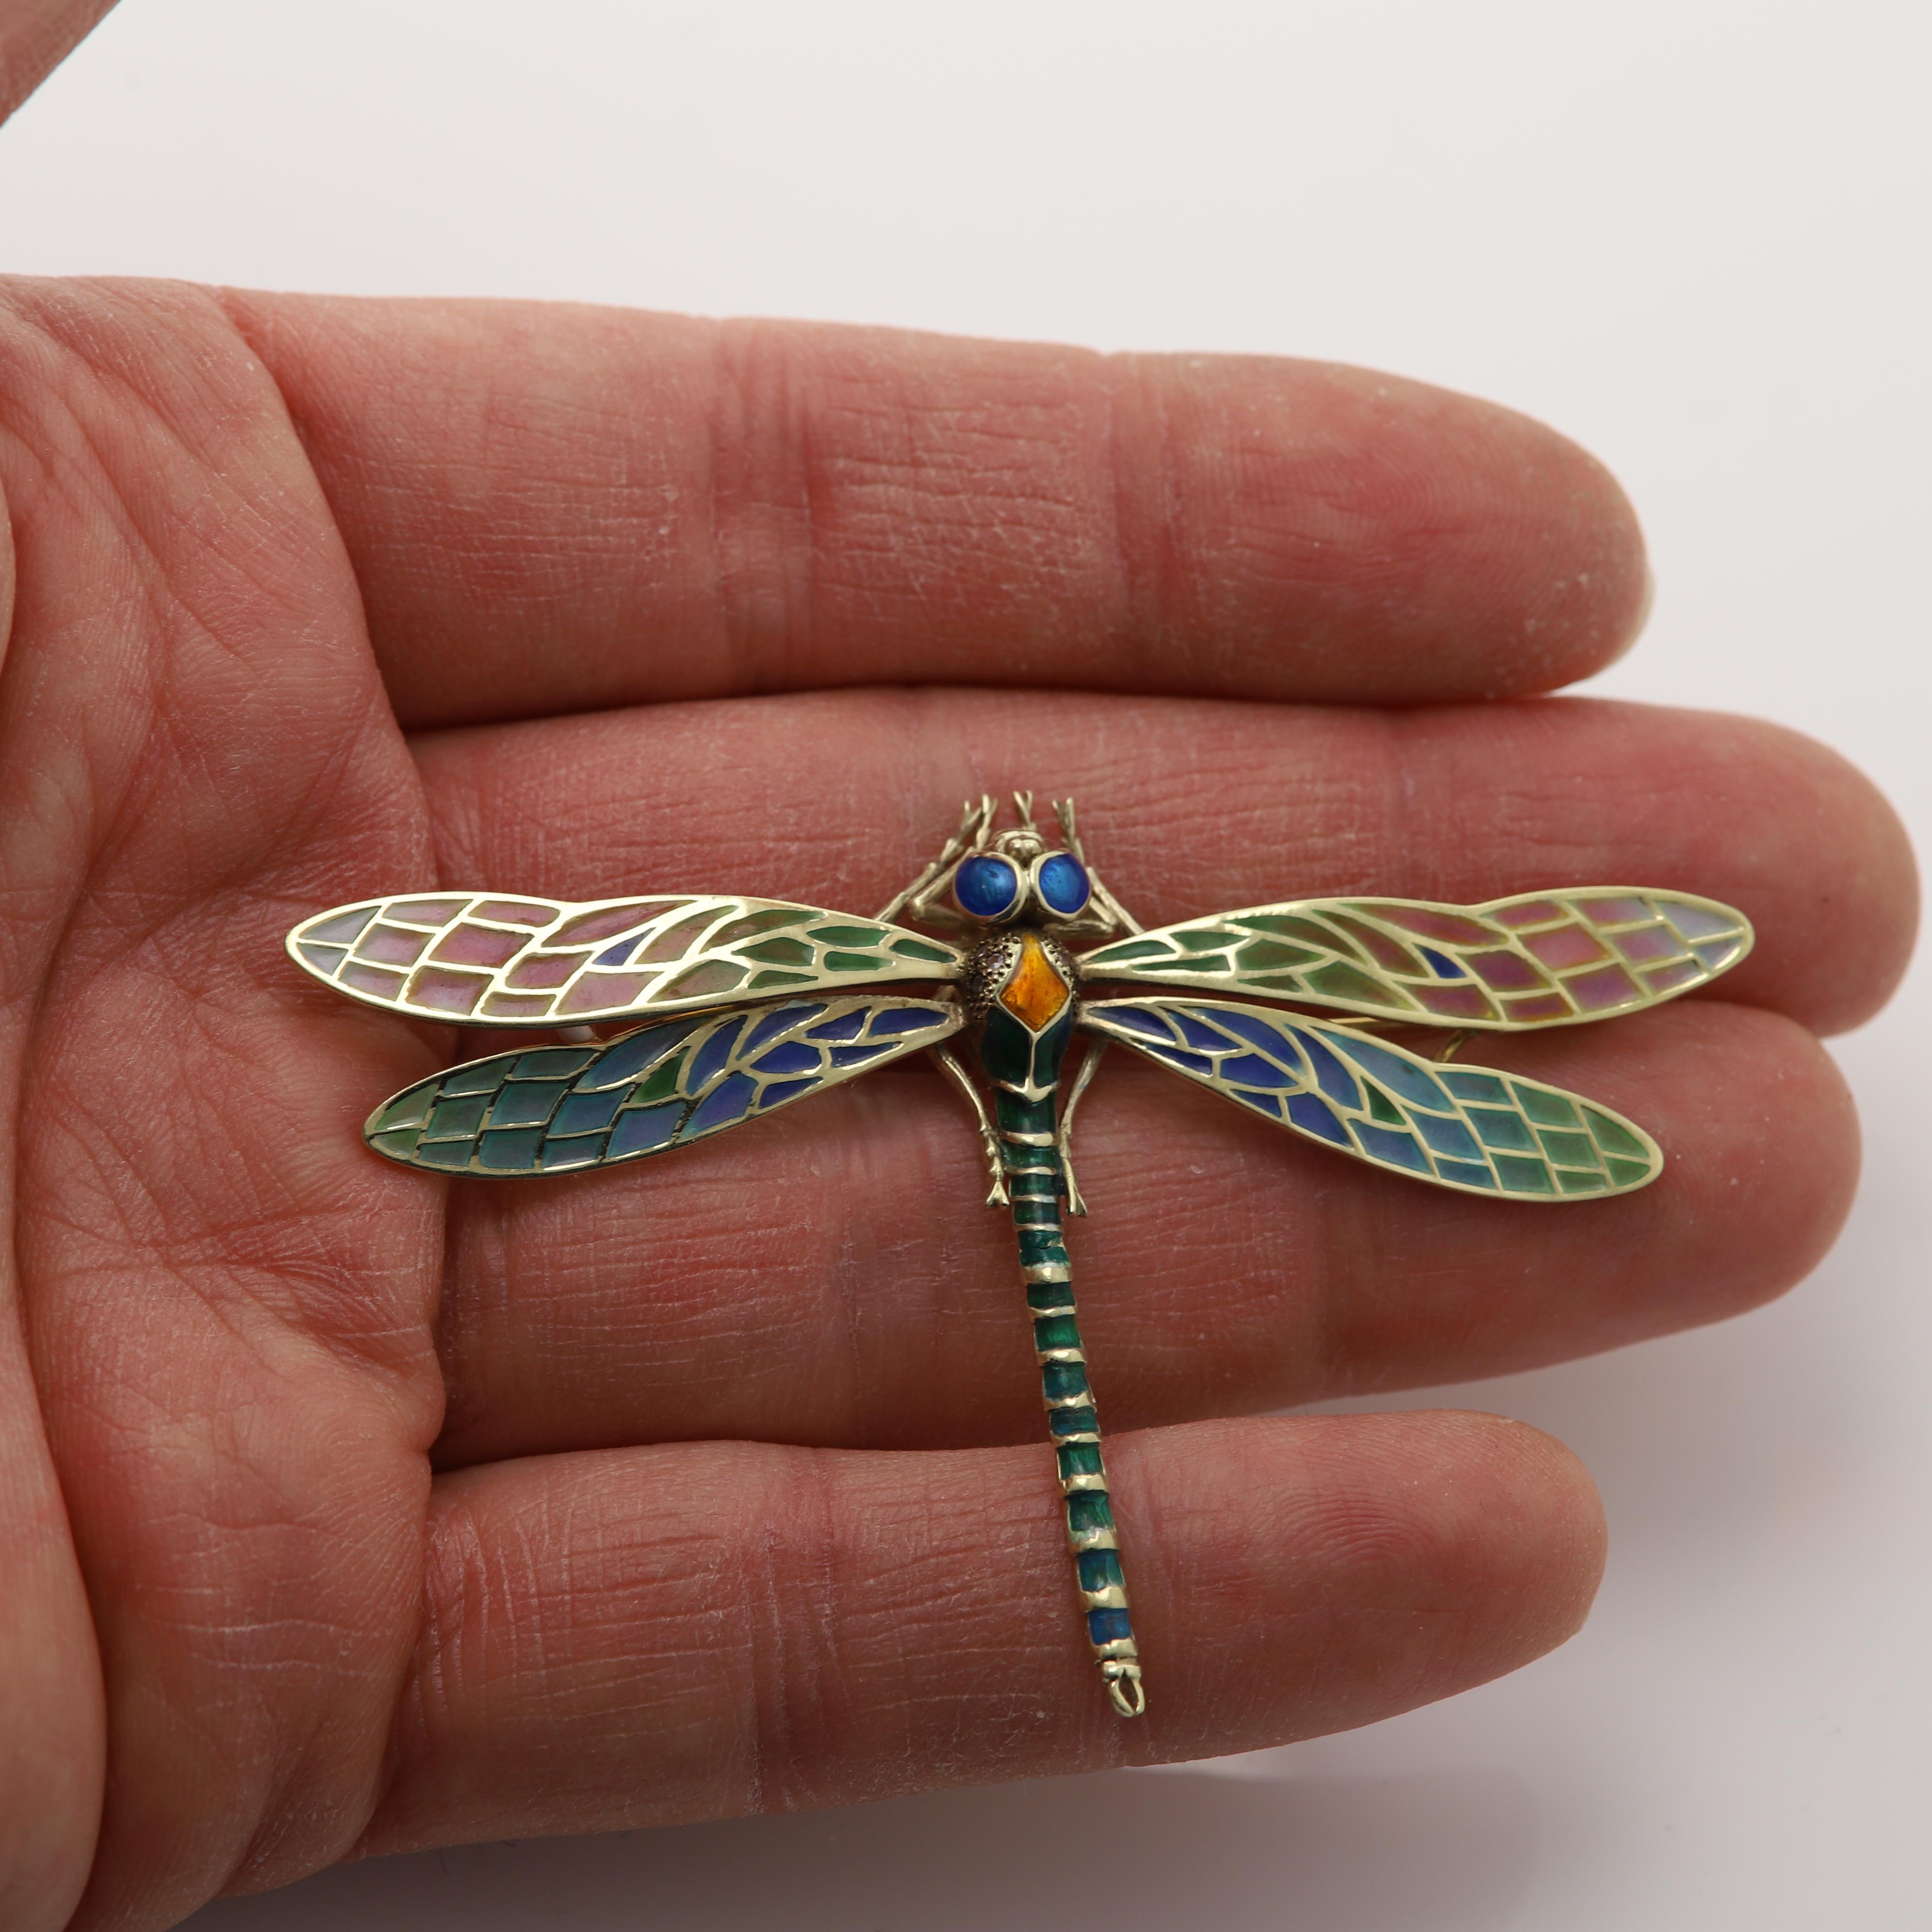 VINTAGE DRAGONFLY BROOCH PIN / NECKLACE
HAND MADE IN SPAIN WITH BRILLIANT COLORS OF ENAMEL
14K YELLOW GOLD 10.7 GRAMS
LARGE SIZE - 3' INCH WIDE
CAN BE MADE INTO A NECKLACE- CHAIN MOT INCLUDED
Included - gift box & Appraisal / Lab